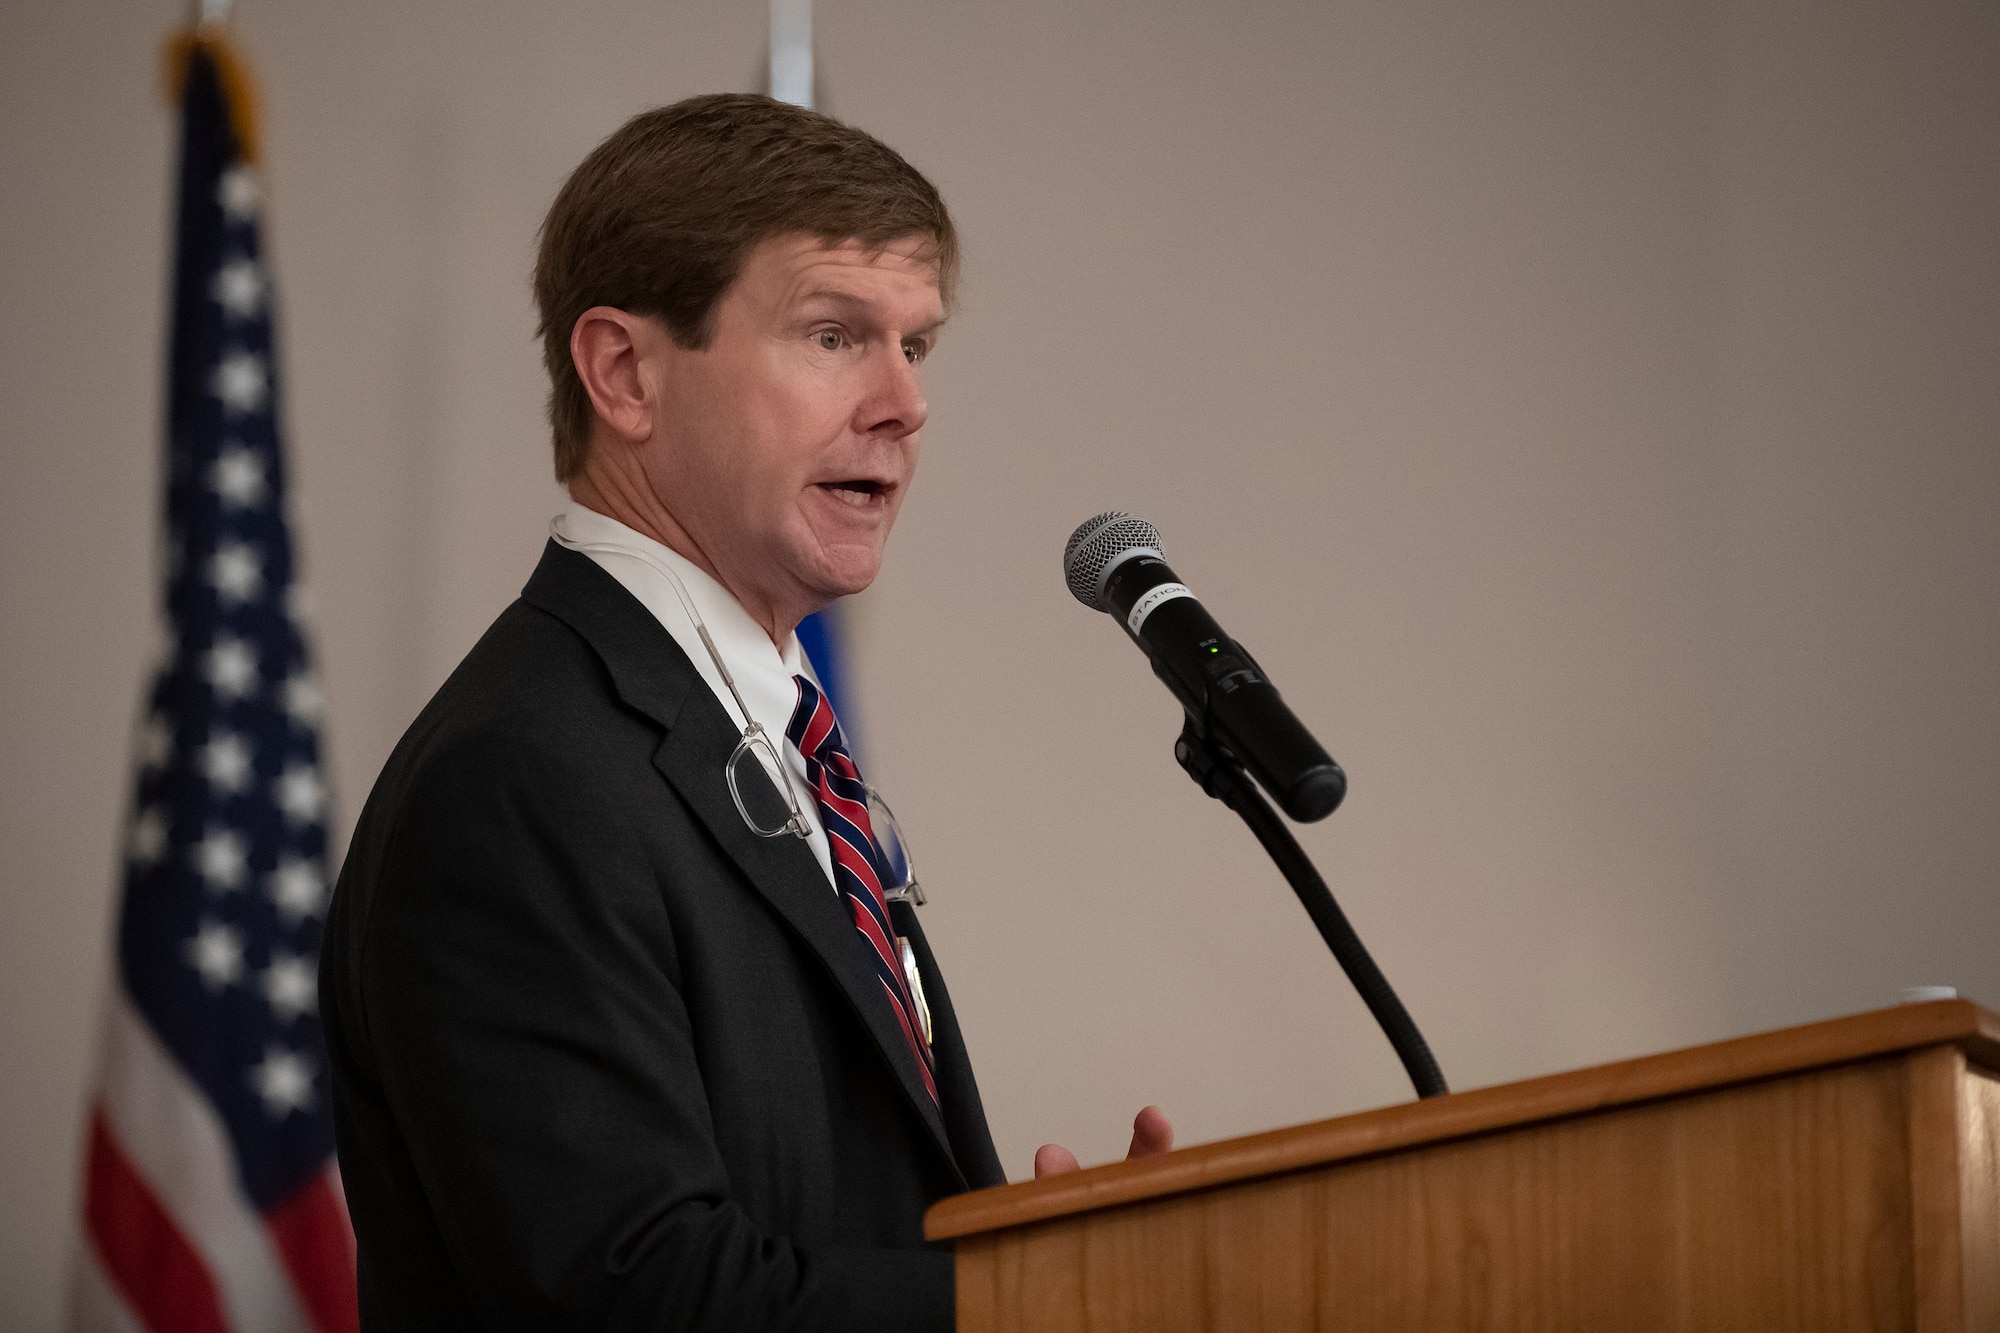 David Dethloff, president of the Shreveport Bossier Military Affairs Council, speaks during the Barksdale Air Force Base, Louisiana and MAC quarterly update luncheon at Barksdale, June 12, 2019. The MAC presented more than a dozen Barksdale Airmen with academic scholarships during the luncheon. (U.S. Air Force photo by Senior Airman Maxwell Daigle)